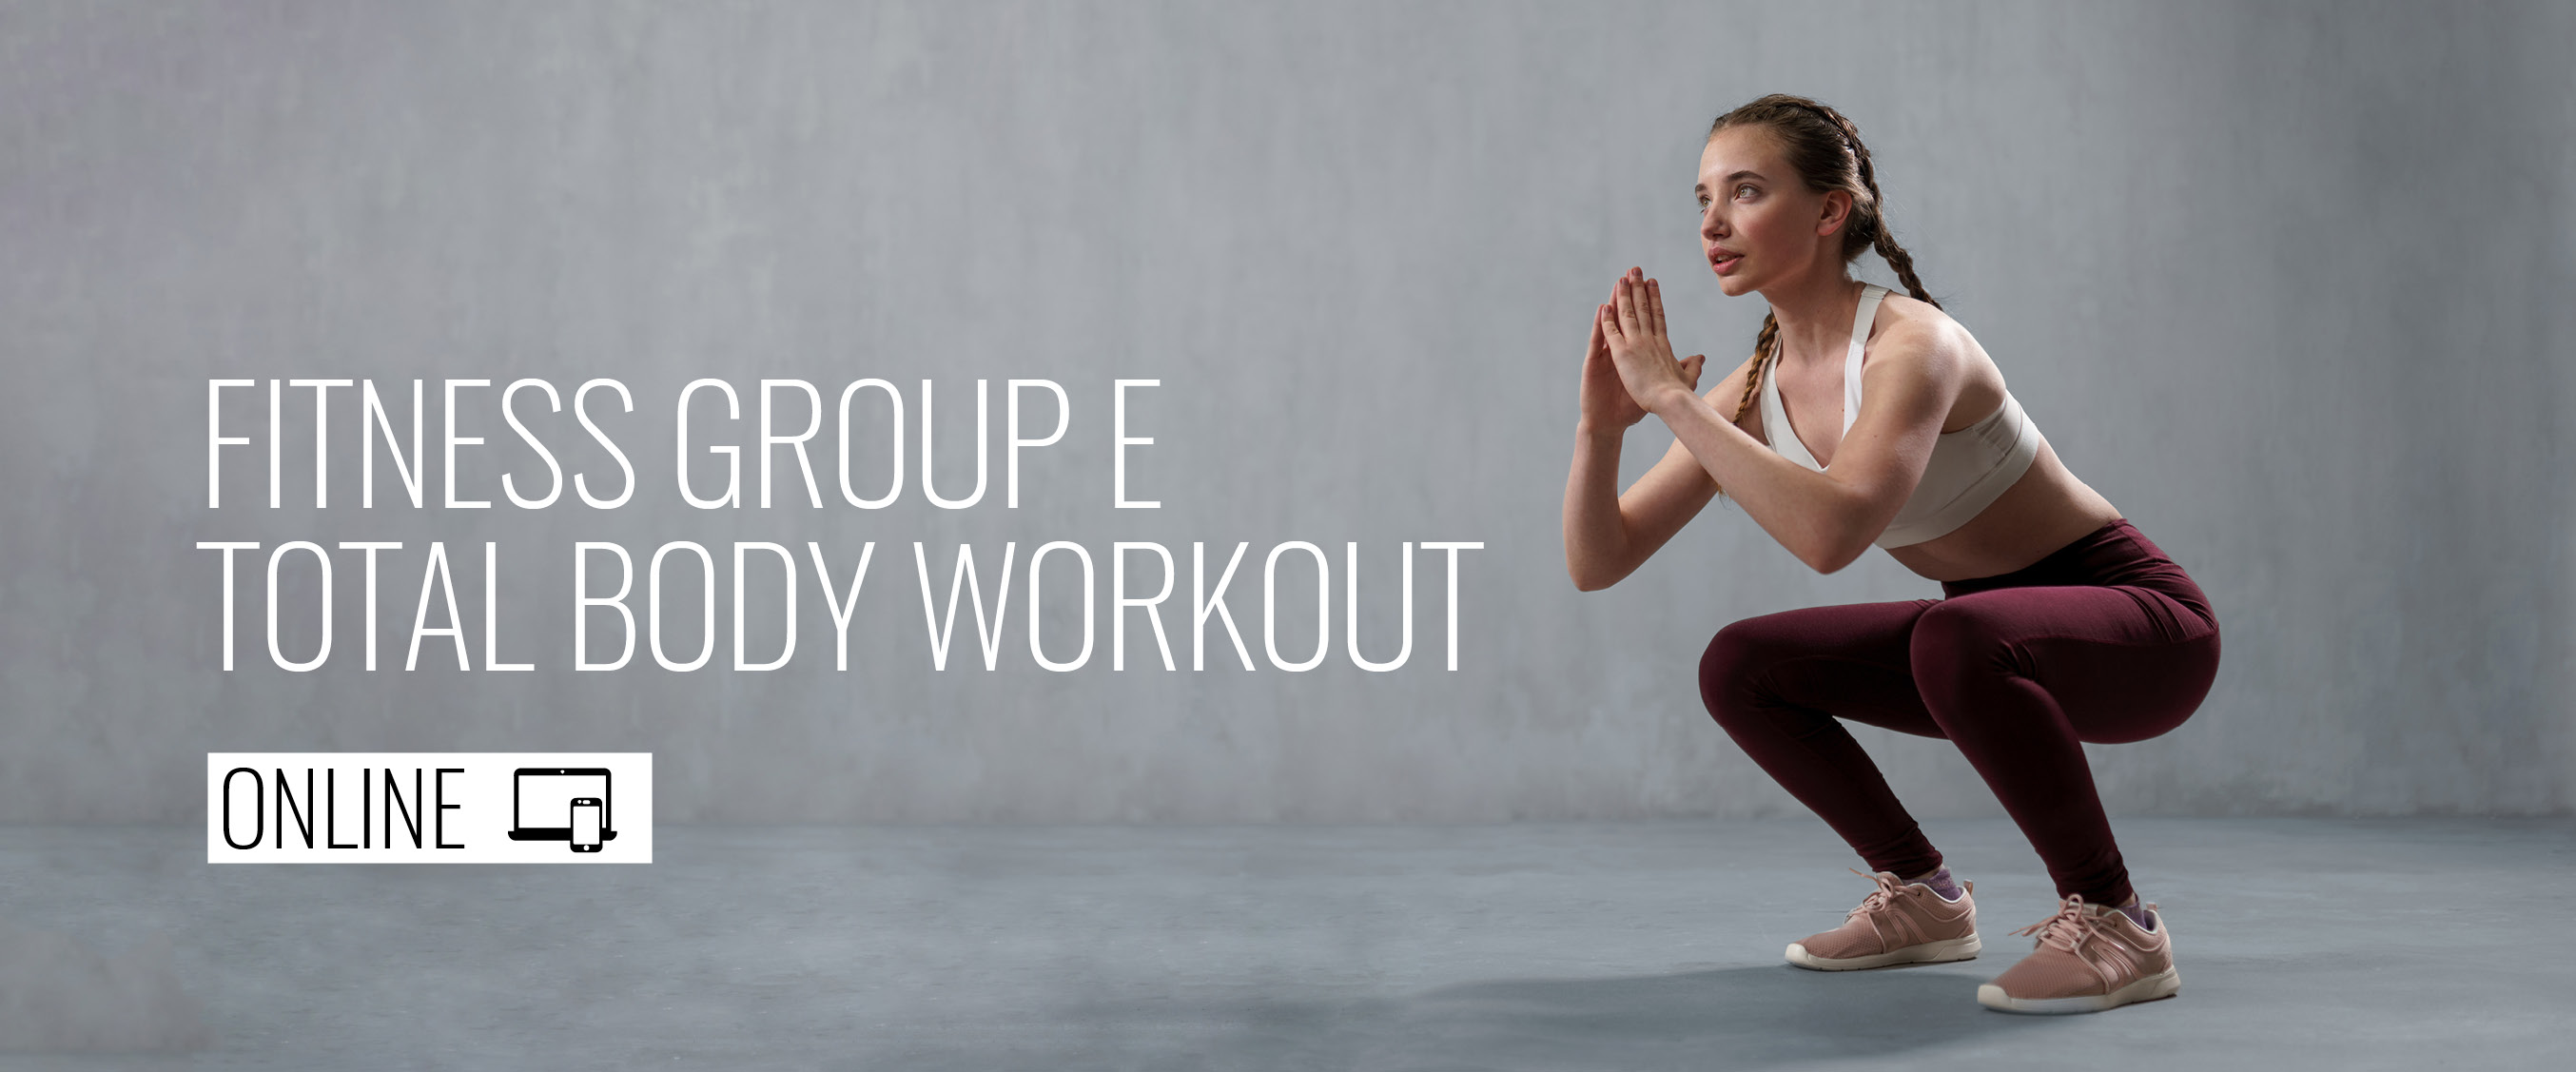 fitness group e total body workout online